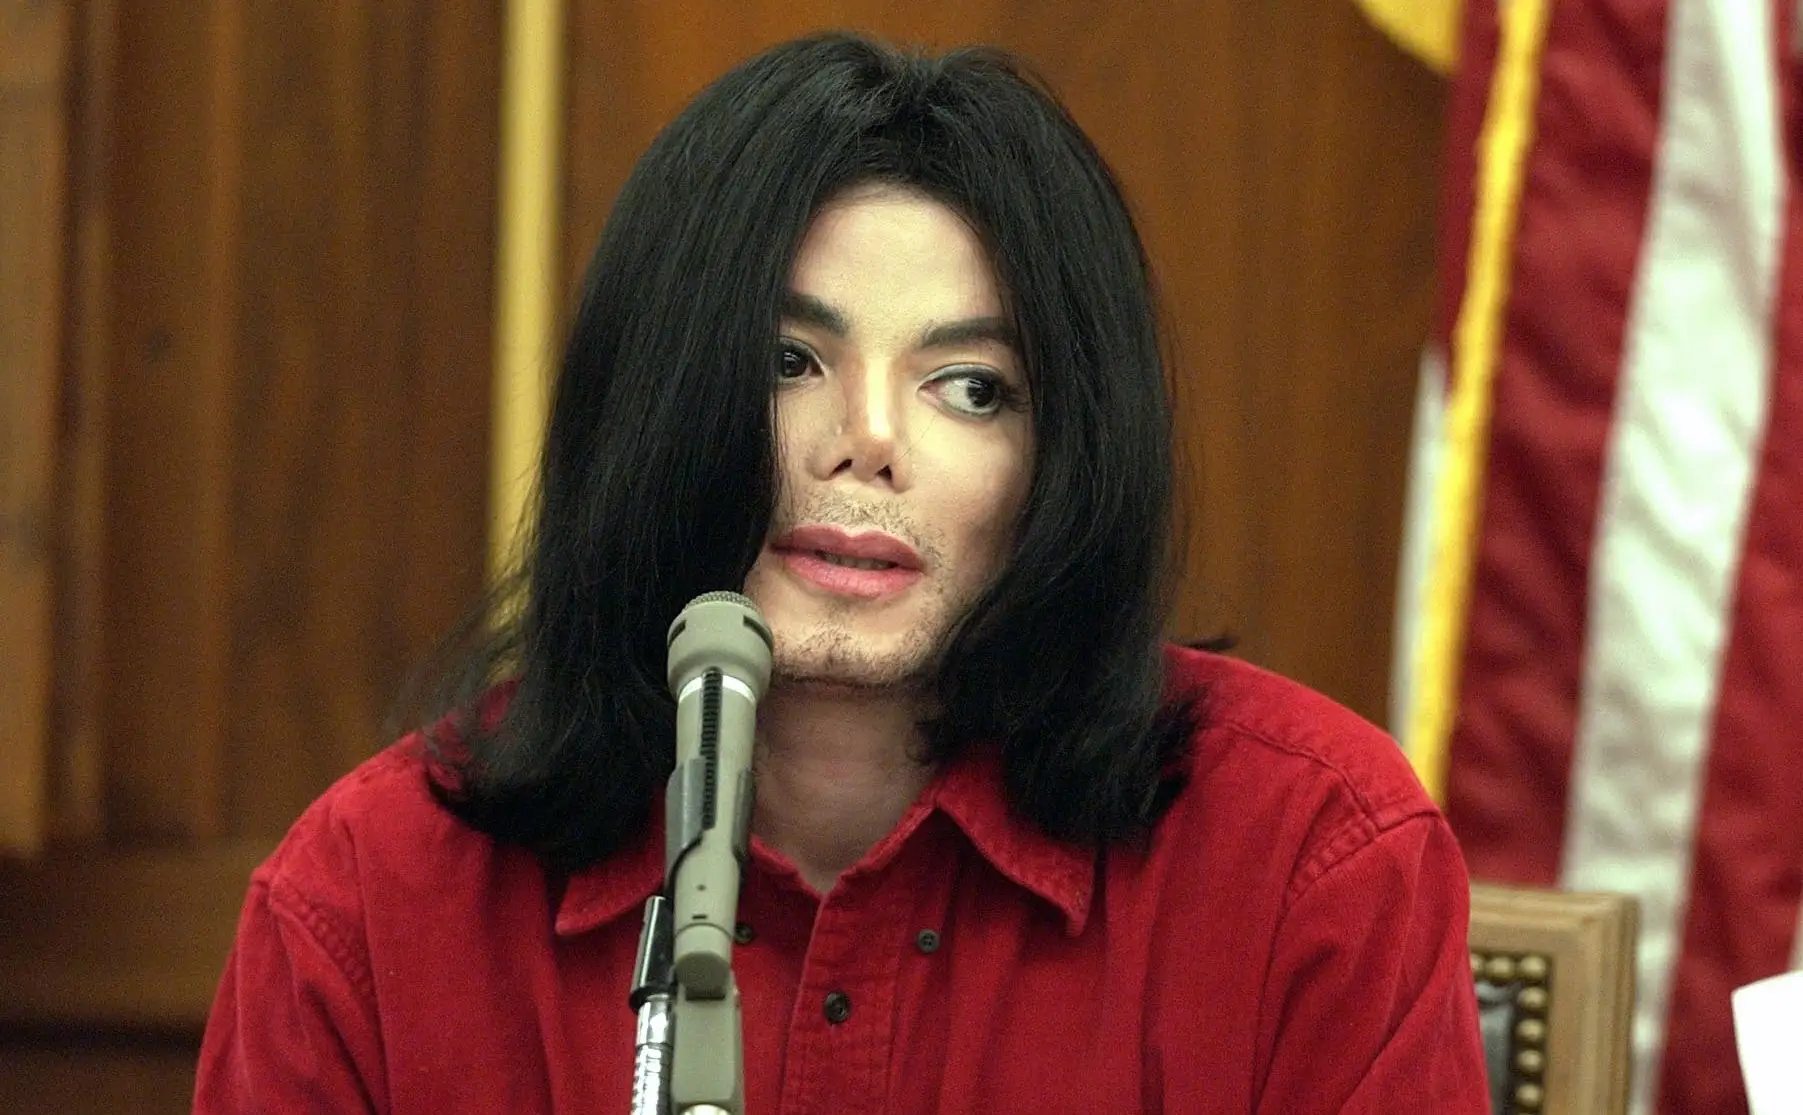 Leaked Michael Jackson Biopic Script Is Reportedly ‘Aggressive’ in Its ‘Pursuit to Make Michael Look Innocent’ of Child Abuse